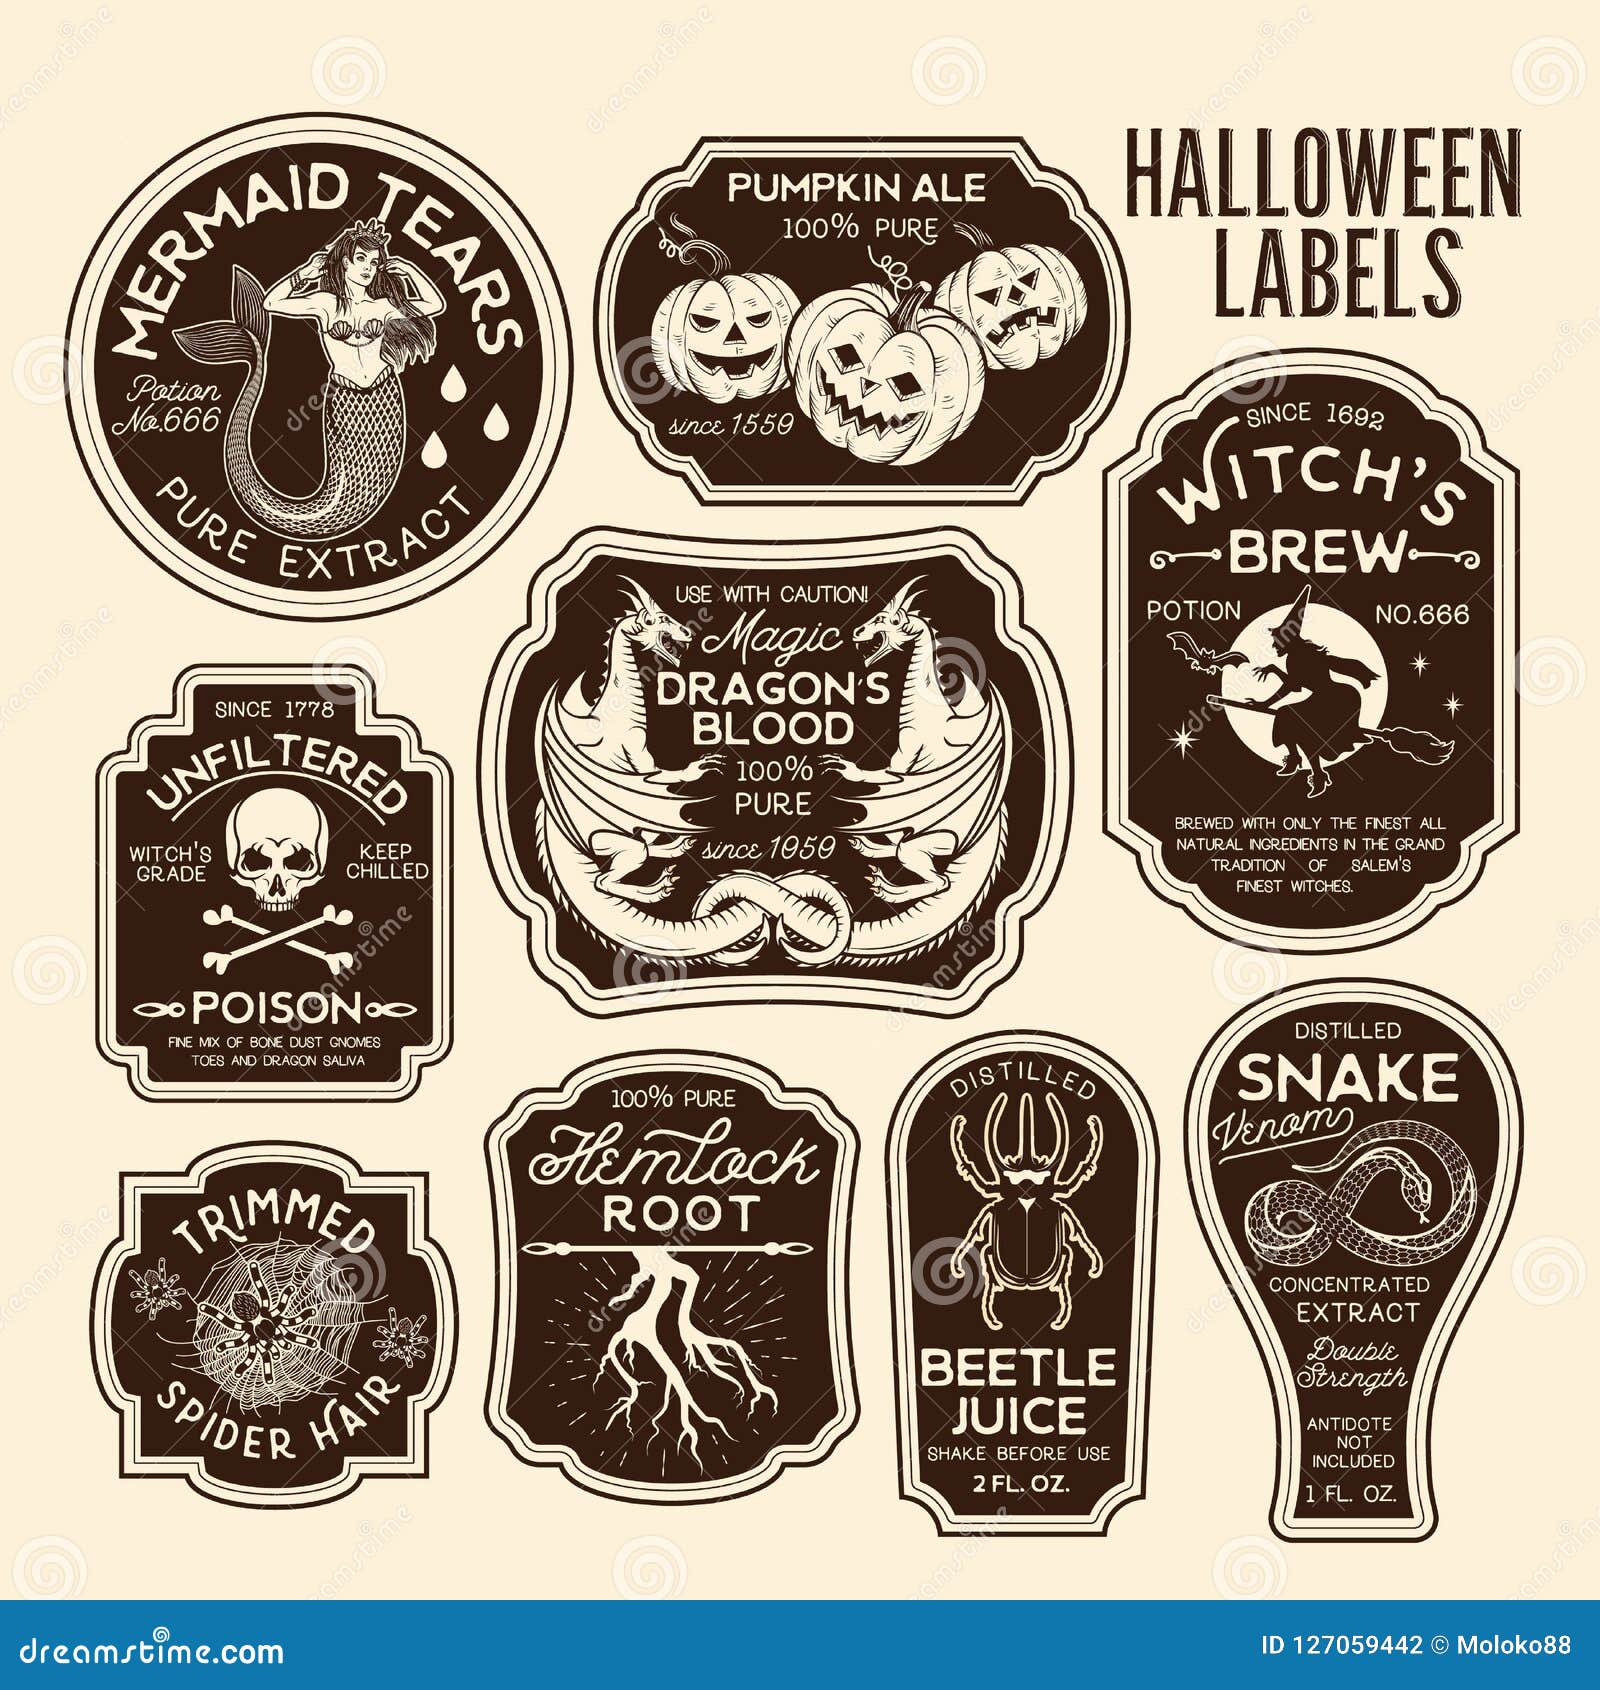 8 Potion apothecary labels Halloween glossy party decoration bat zombie vampire 